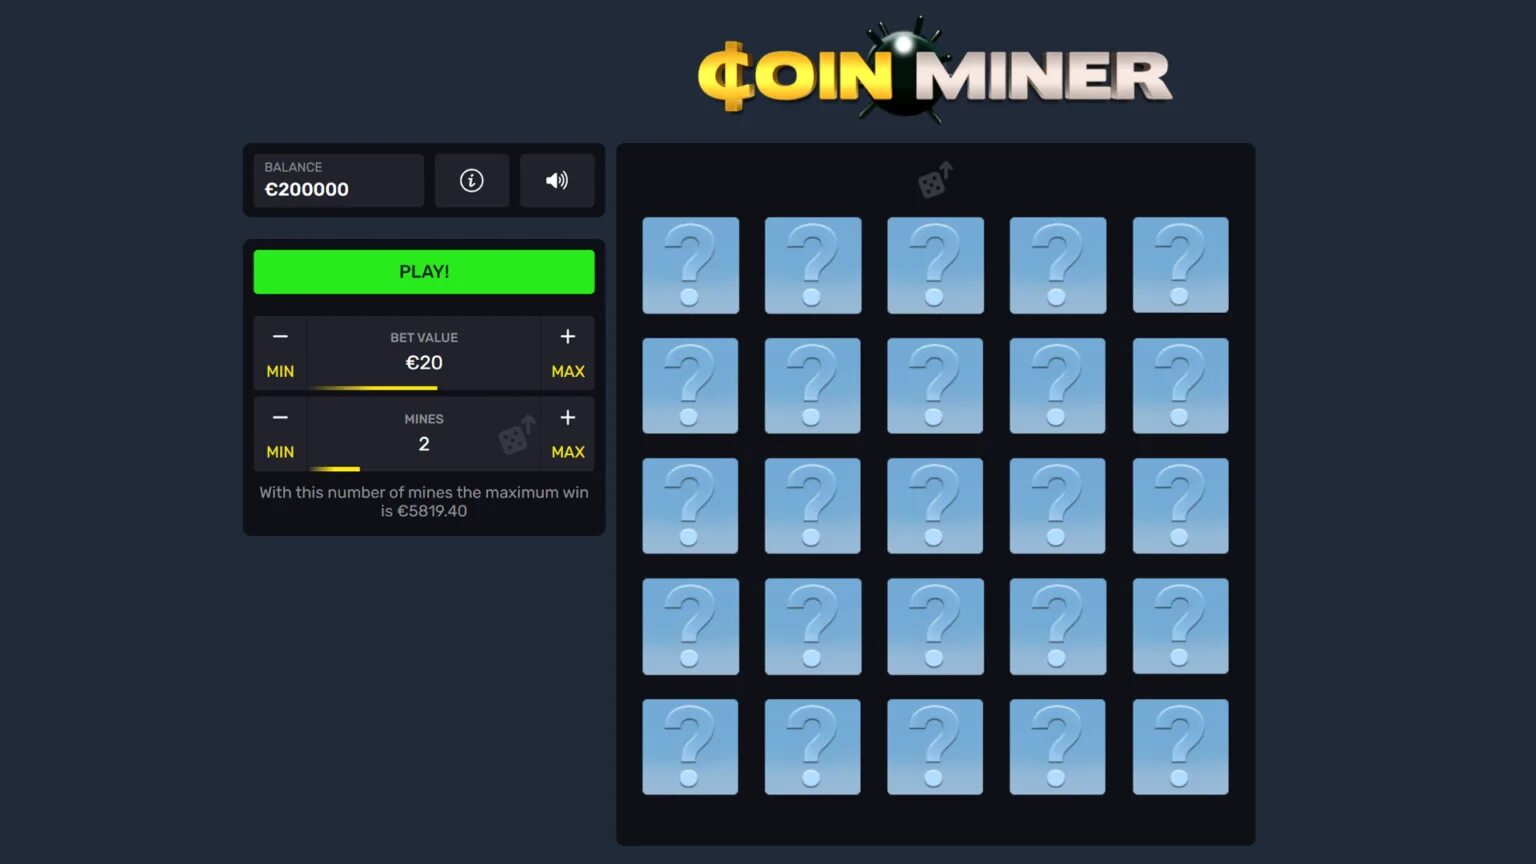 Coin miner